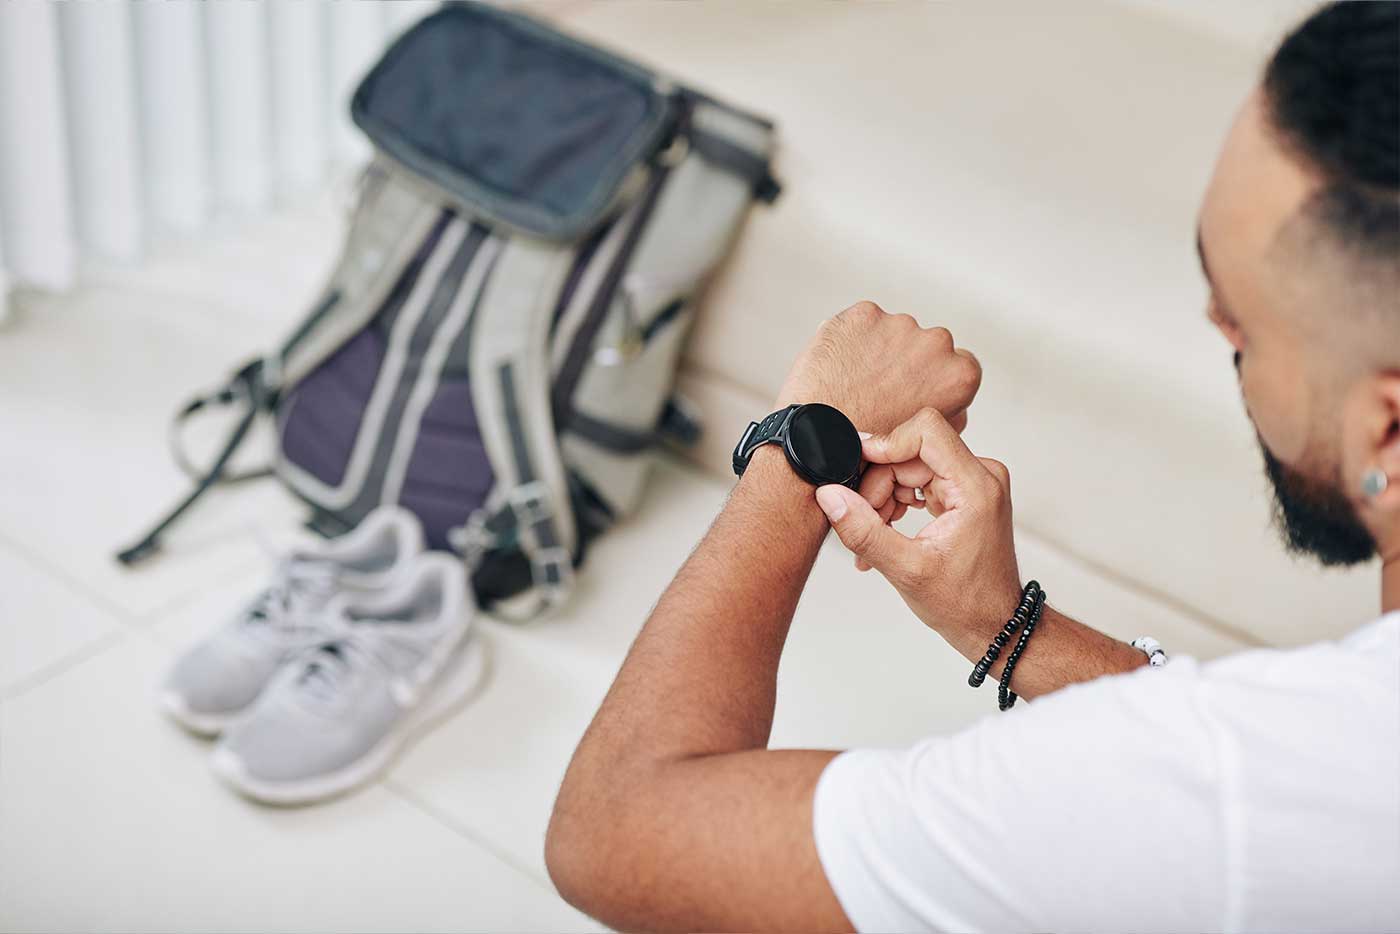 Up Your Fitness Game With These 5 Smartwatch & Fitness Tracker Hacks